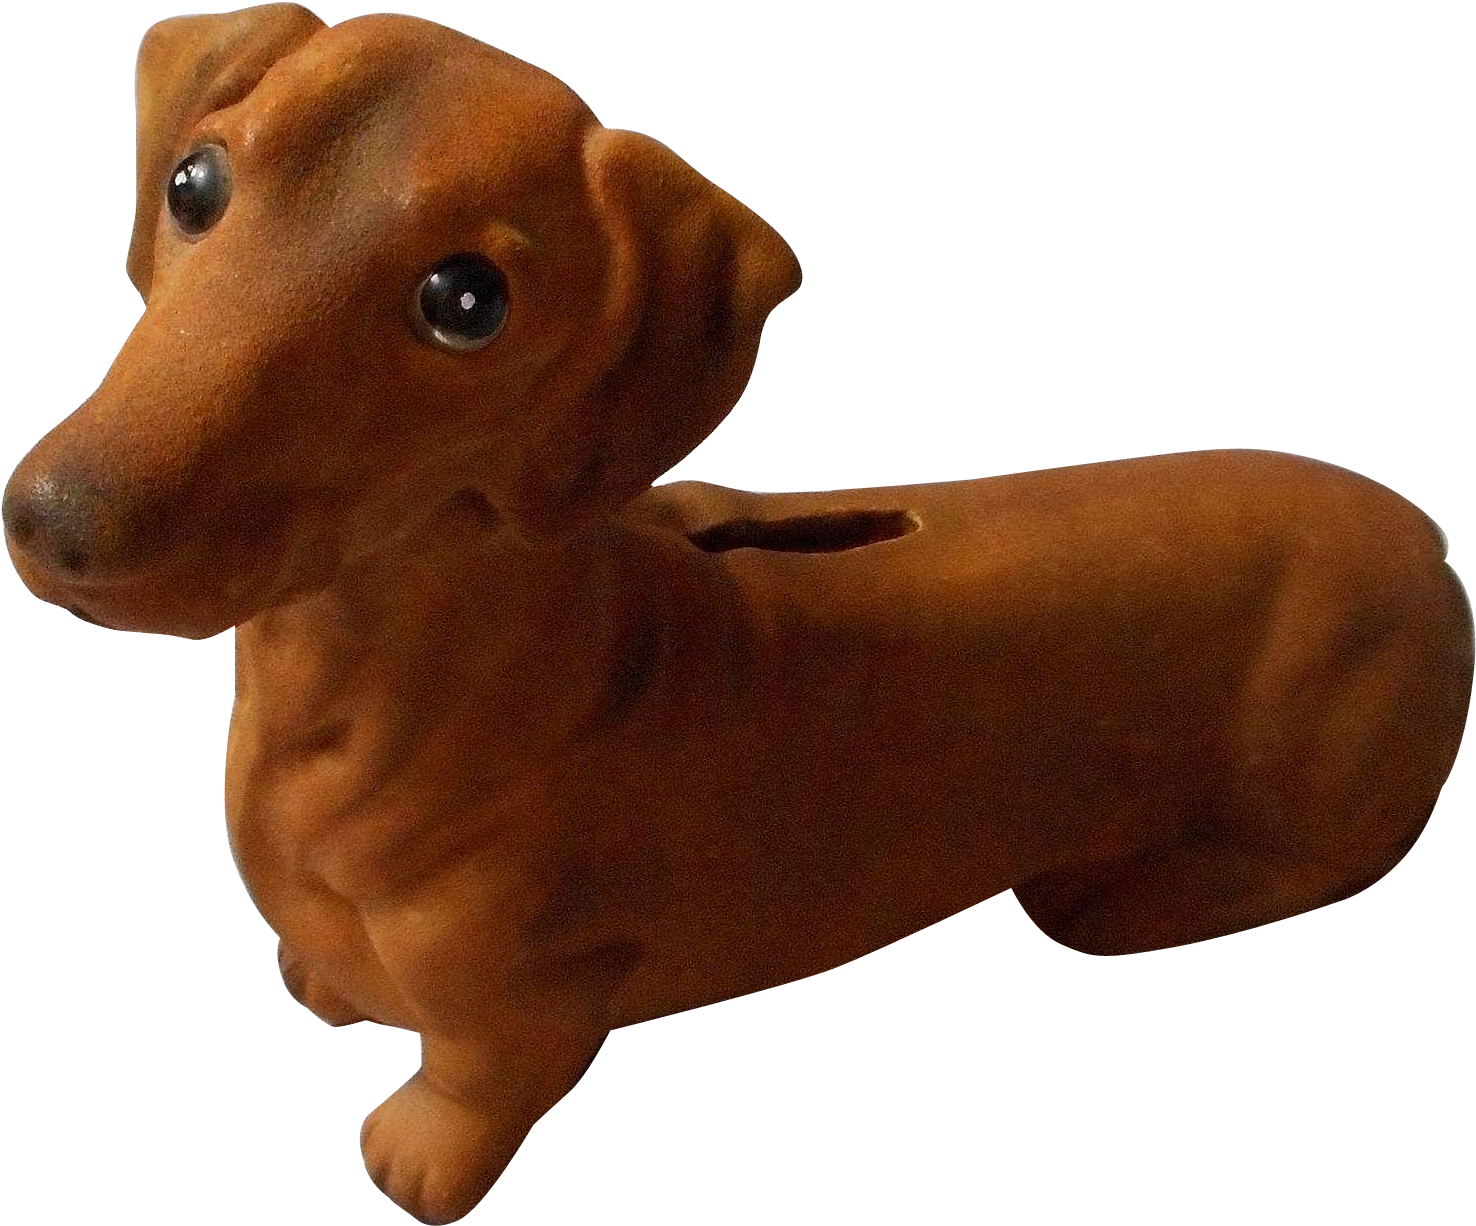 Dachshund Figurine Object PNG image